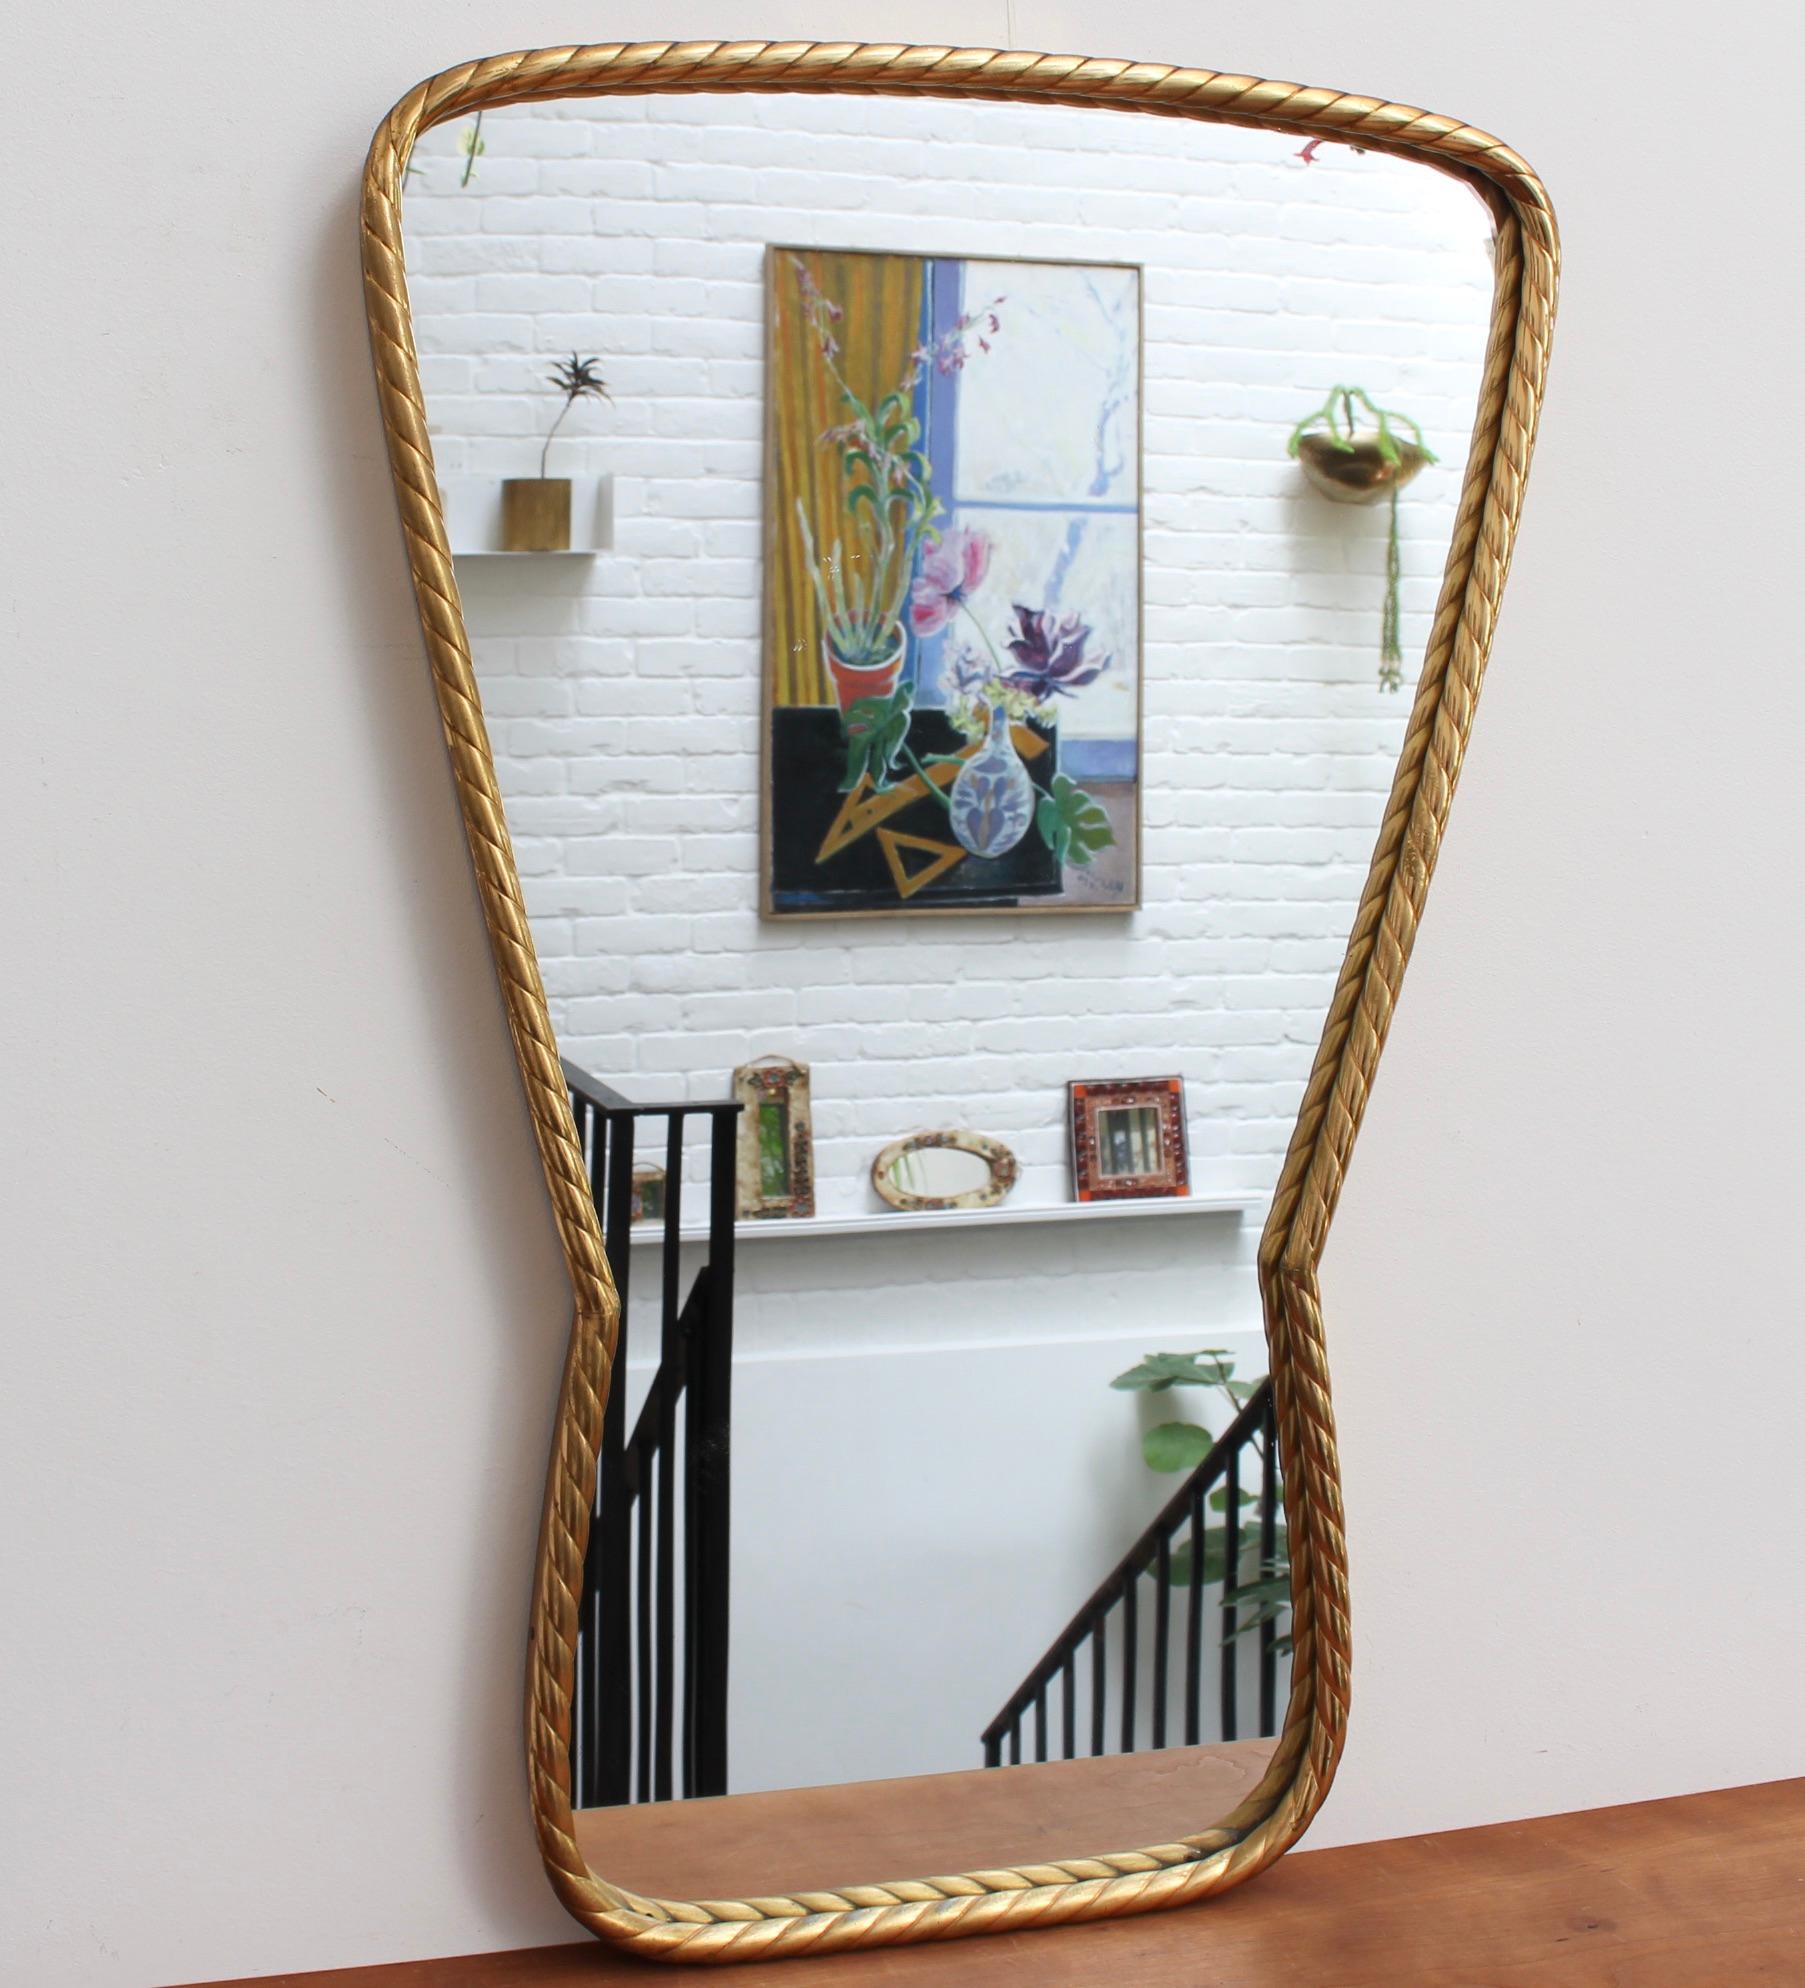 Vintage Italian wall mirror in brass frame with stranded rope pattern, (circa 1950s). The mirror has presence with distinctive lines and elegant good looks. The keyhole-shape with stranded rope pattern is unique and rarely found on the vintage